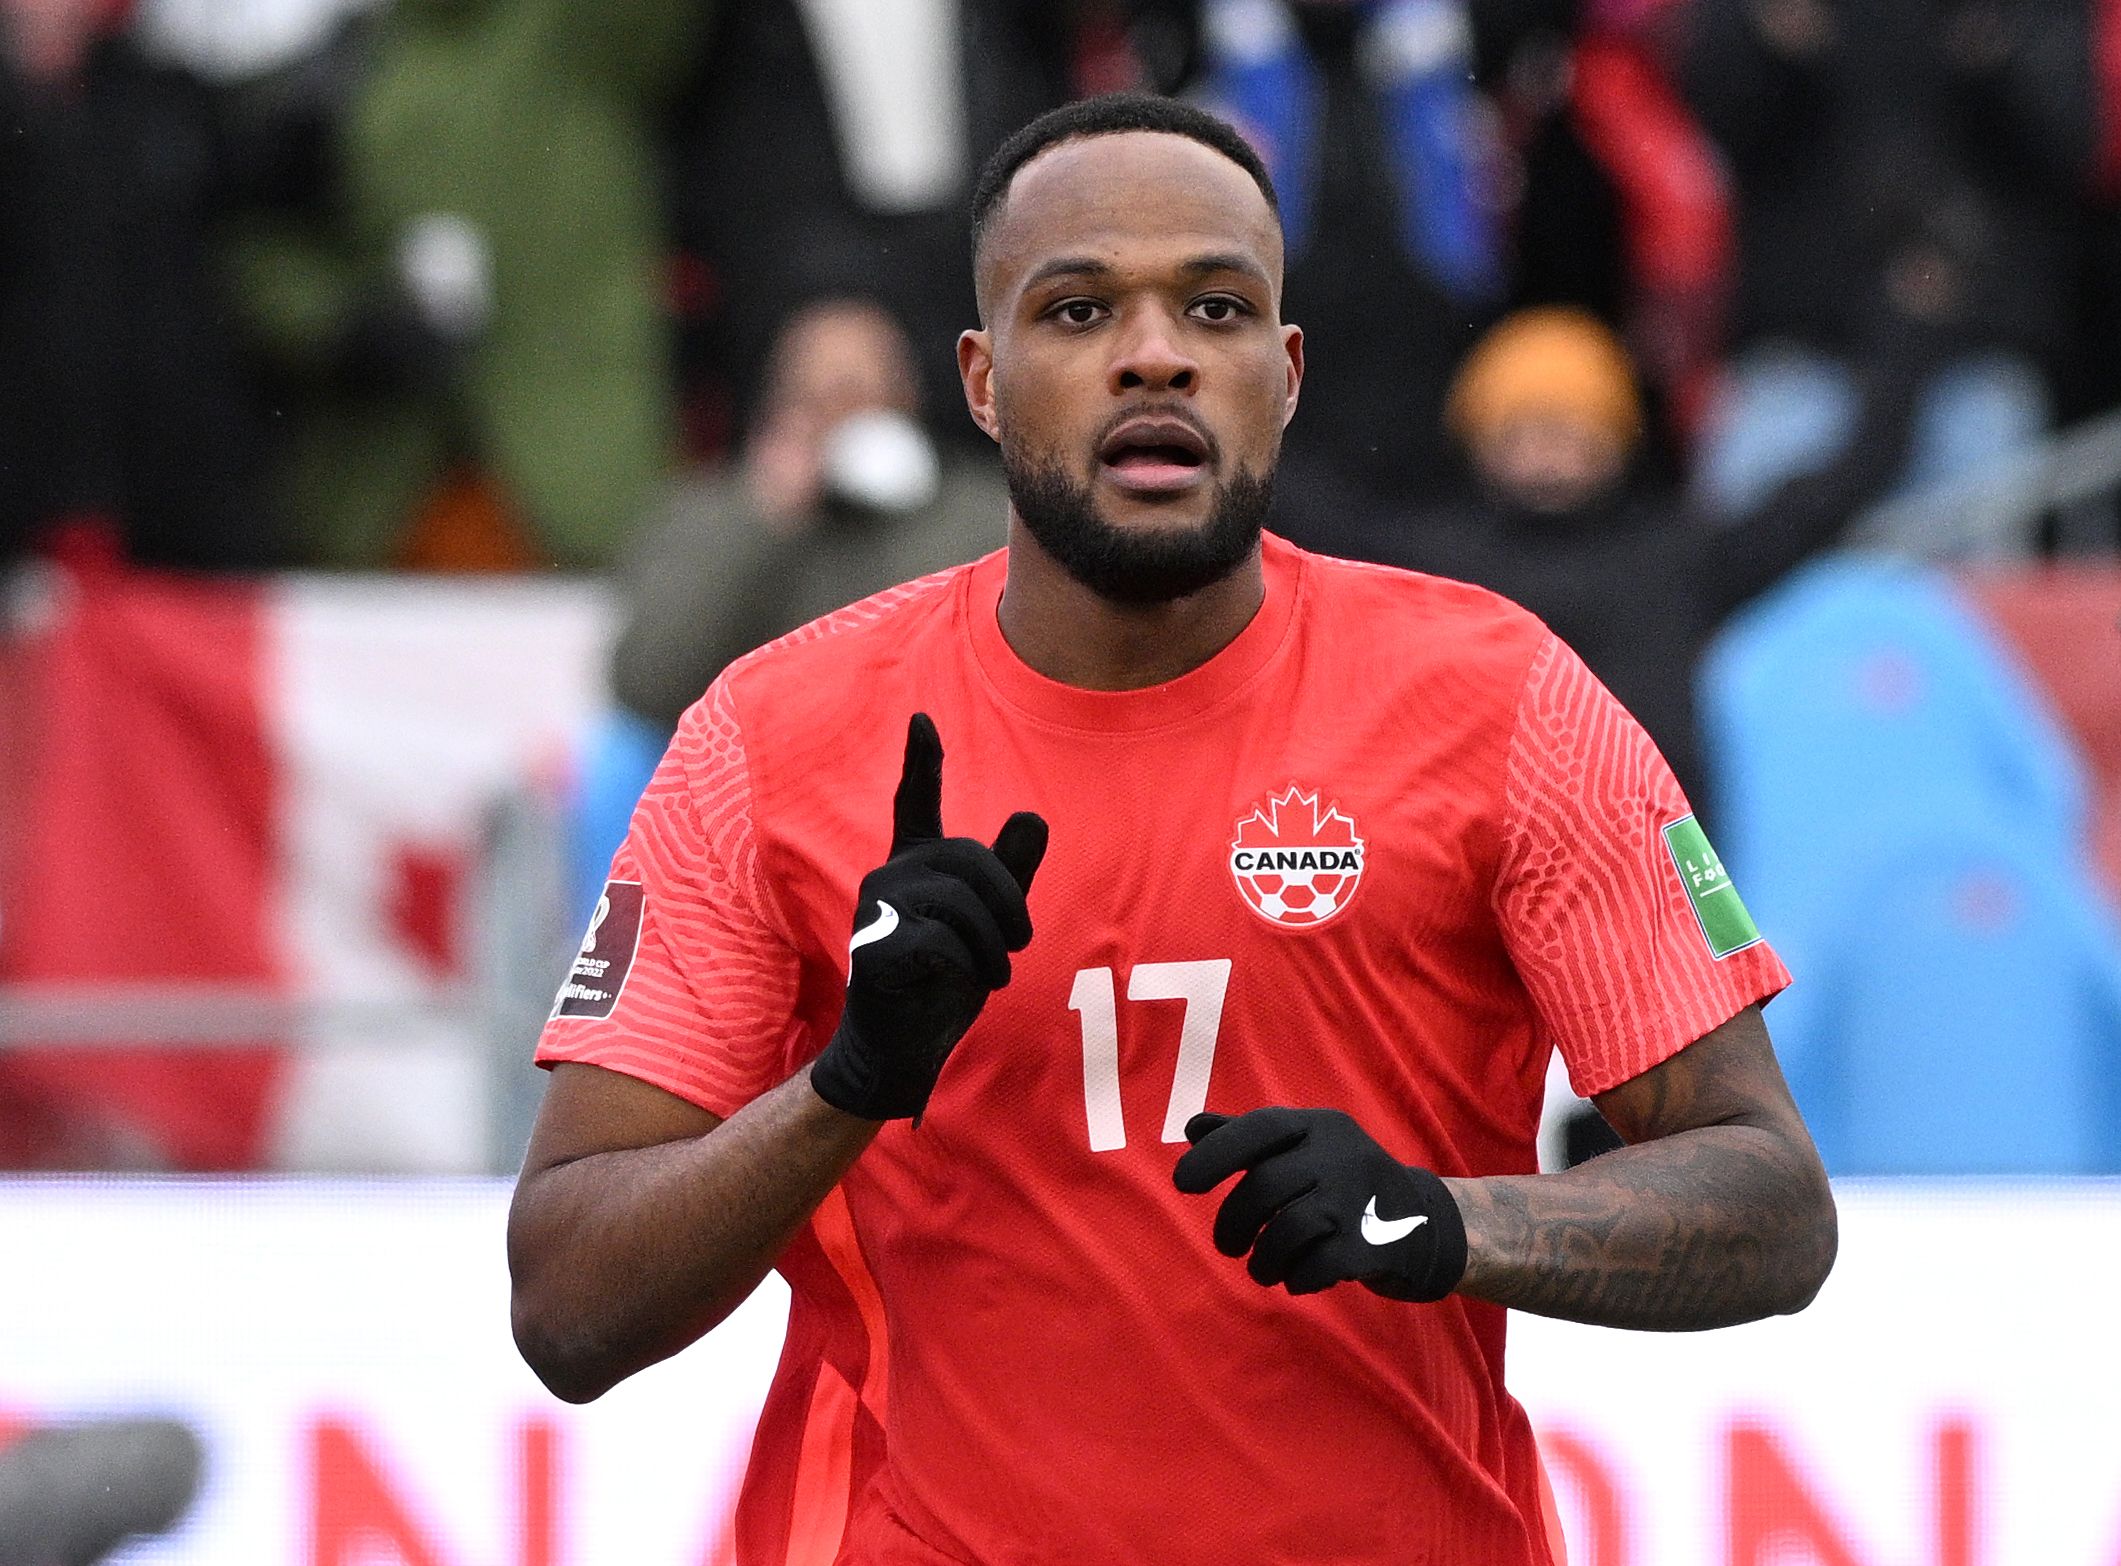 Mar 27, 2022; Toronto, Ontario, CAN;  Canada forward Cyle Larin (17) gestures as he celebrates scoring a goal against Jamaica in the first half of a FIFA World Cup qualifying soccer match at BMO Field. Mandatory Credit: Dan Hamilton-USA TODAY Sports